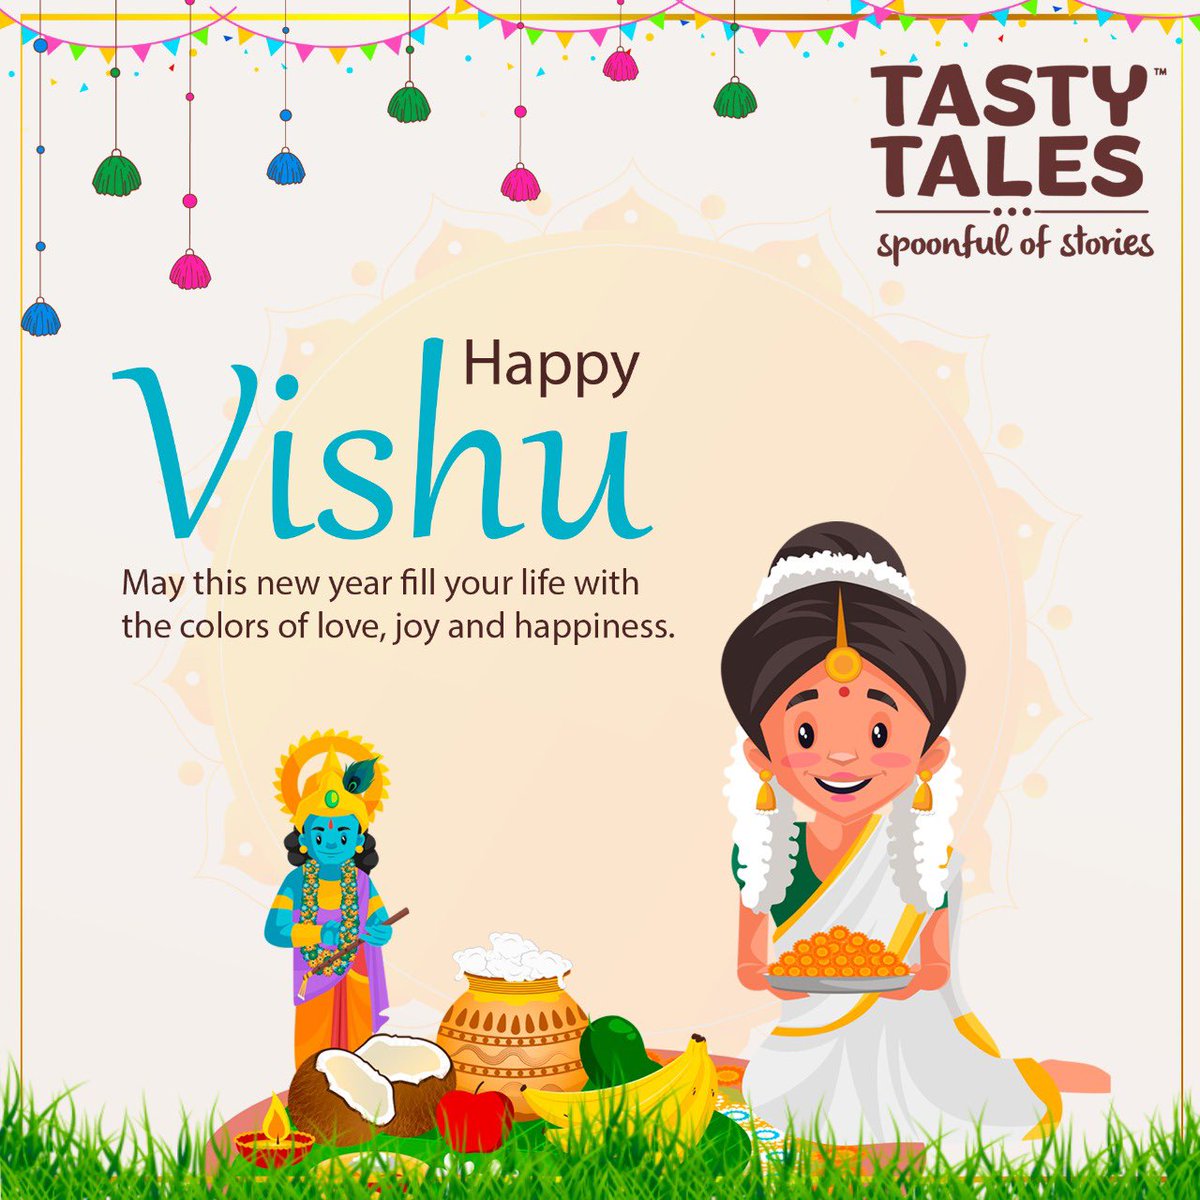 May the joy of Vishu bring prosperity, peace and love to you and your family. Happy Vishu! #TastyTales #Spoonfulofstories #readytocook #readyin20mintues #DishesallaroundIndia #Ordernow #Easytomake #authenticcurrypastes #homemade #Justlikemommade #HappyVishu